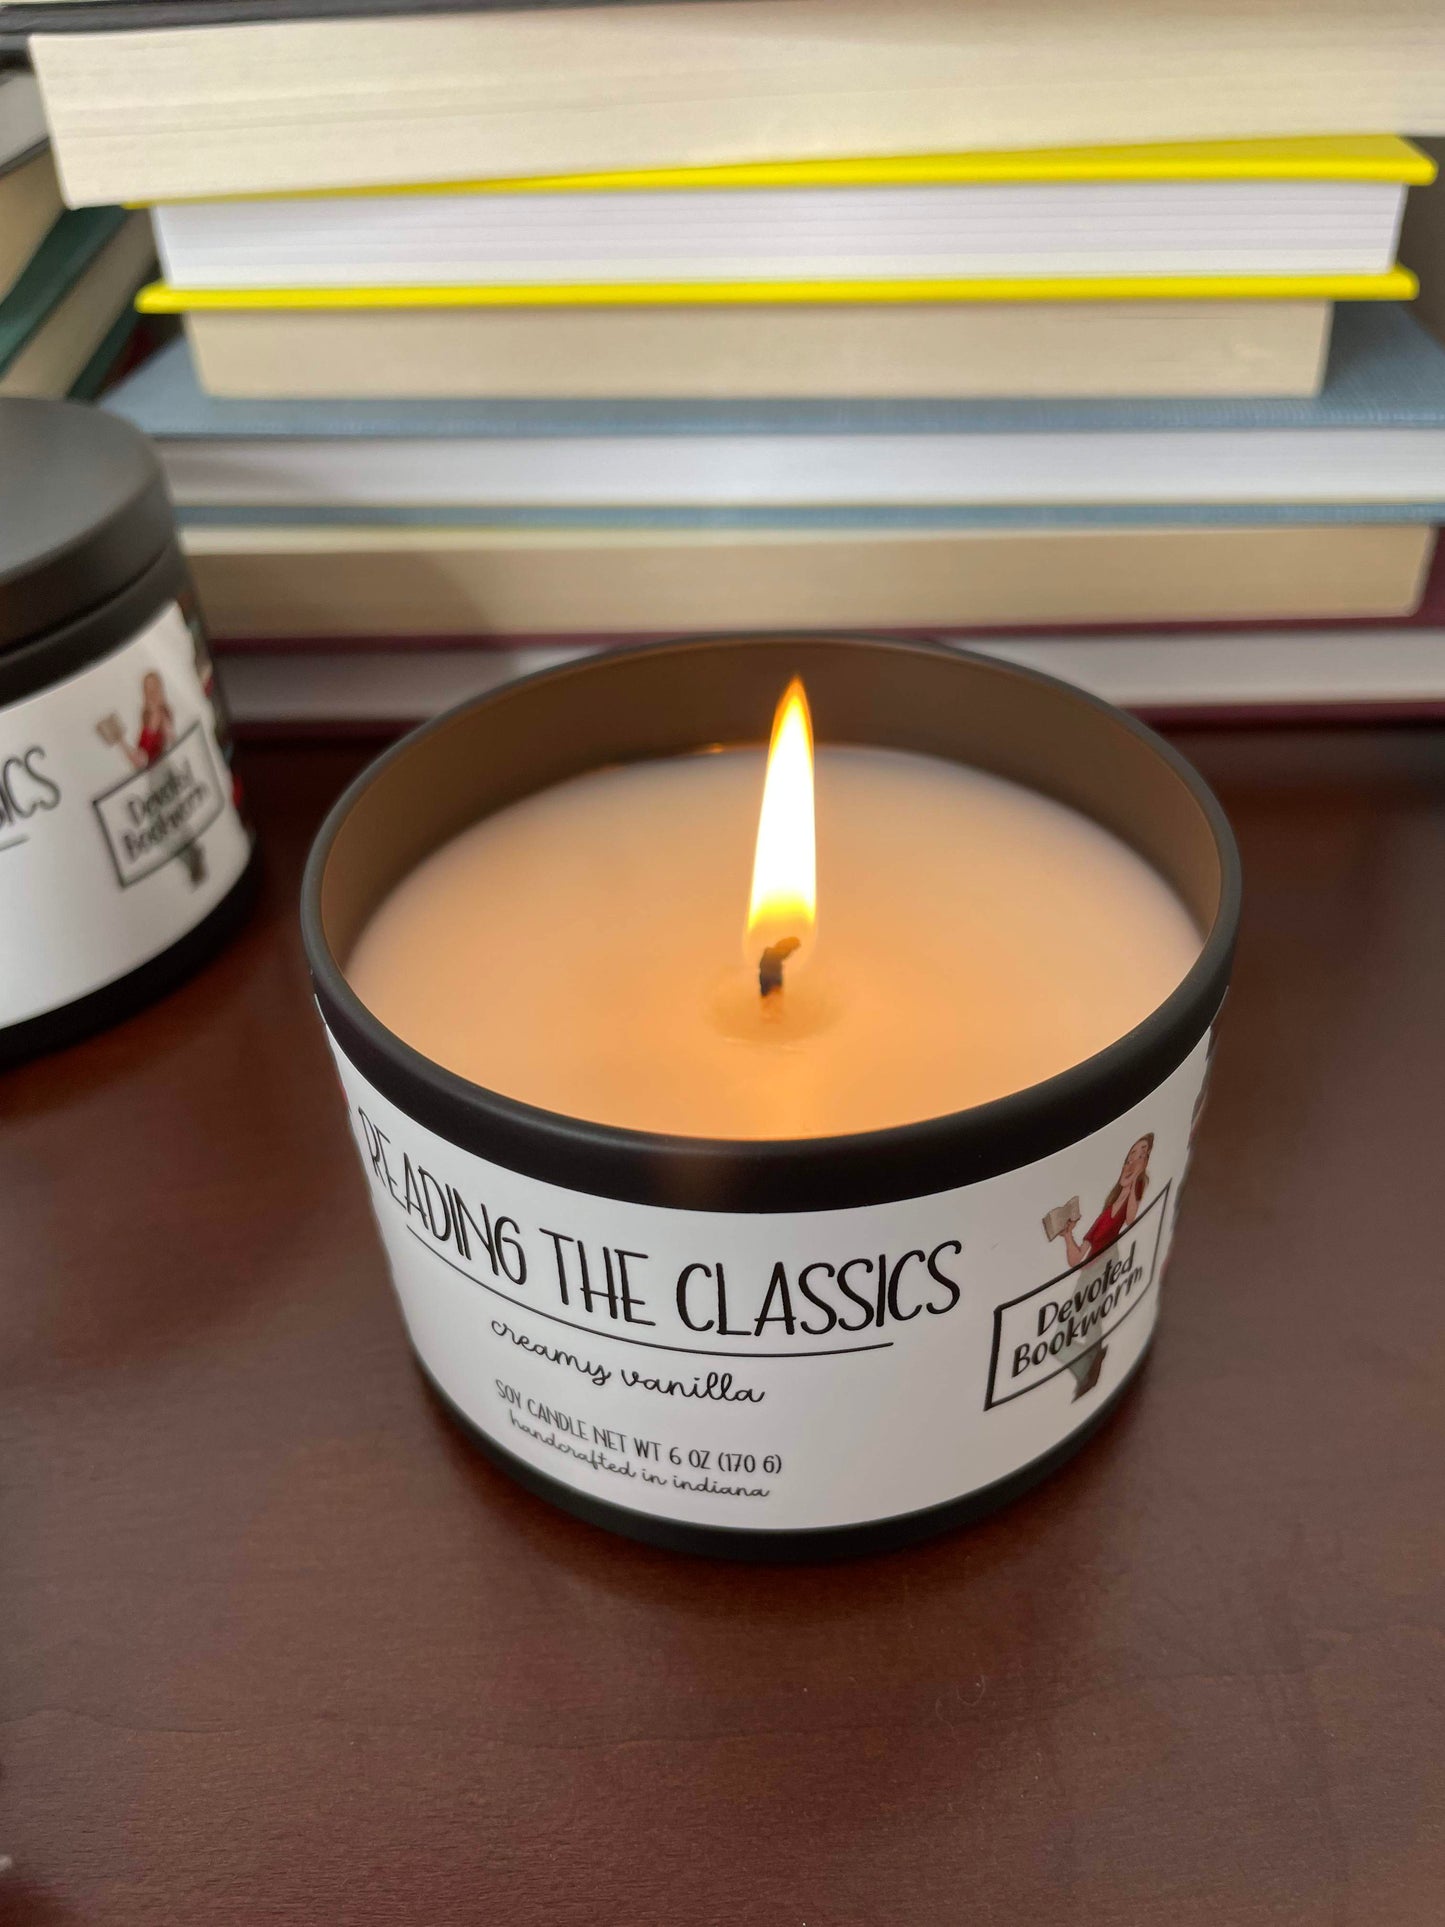 Reading the Classics Soy Candle